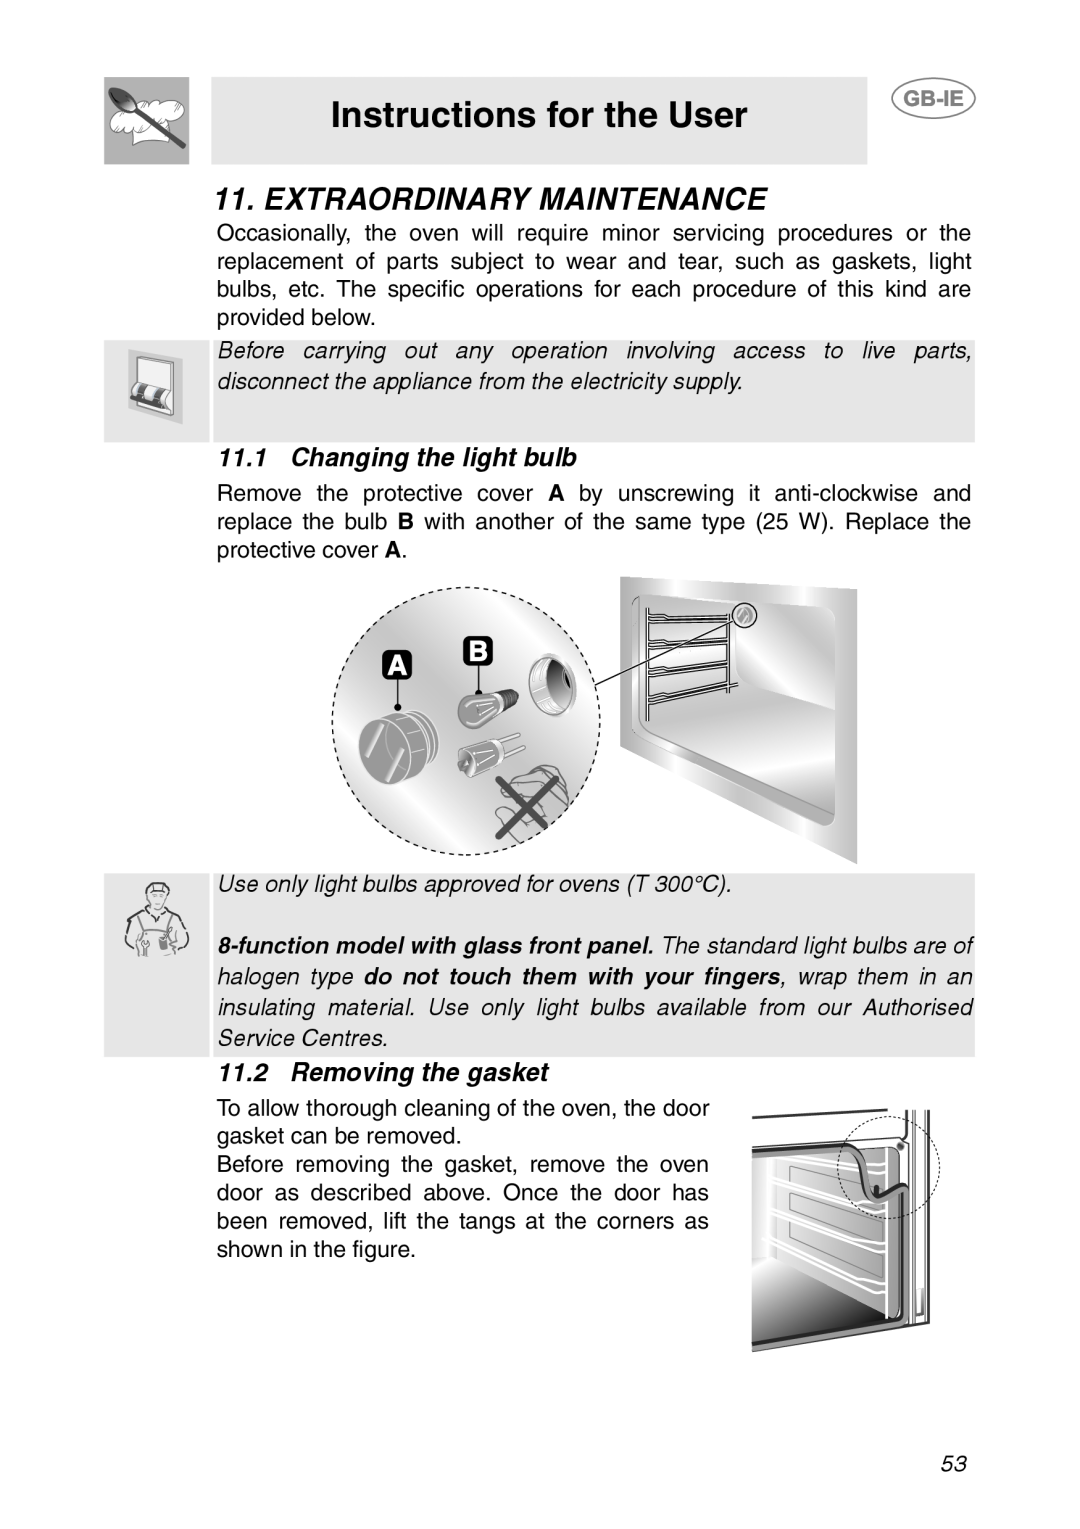 Smeg AP361MFN, AP361MFX Extraordinary Maintenance, Changing the light bulb, Removing the gasket, Instructions for the User 